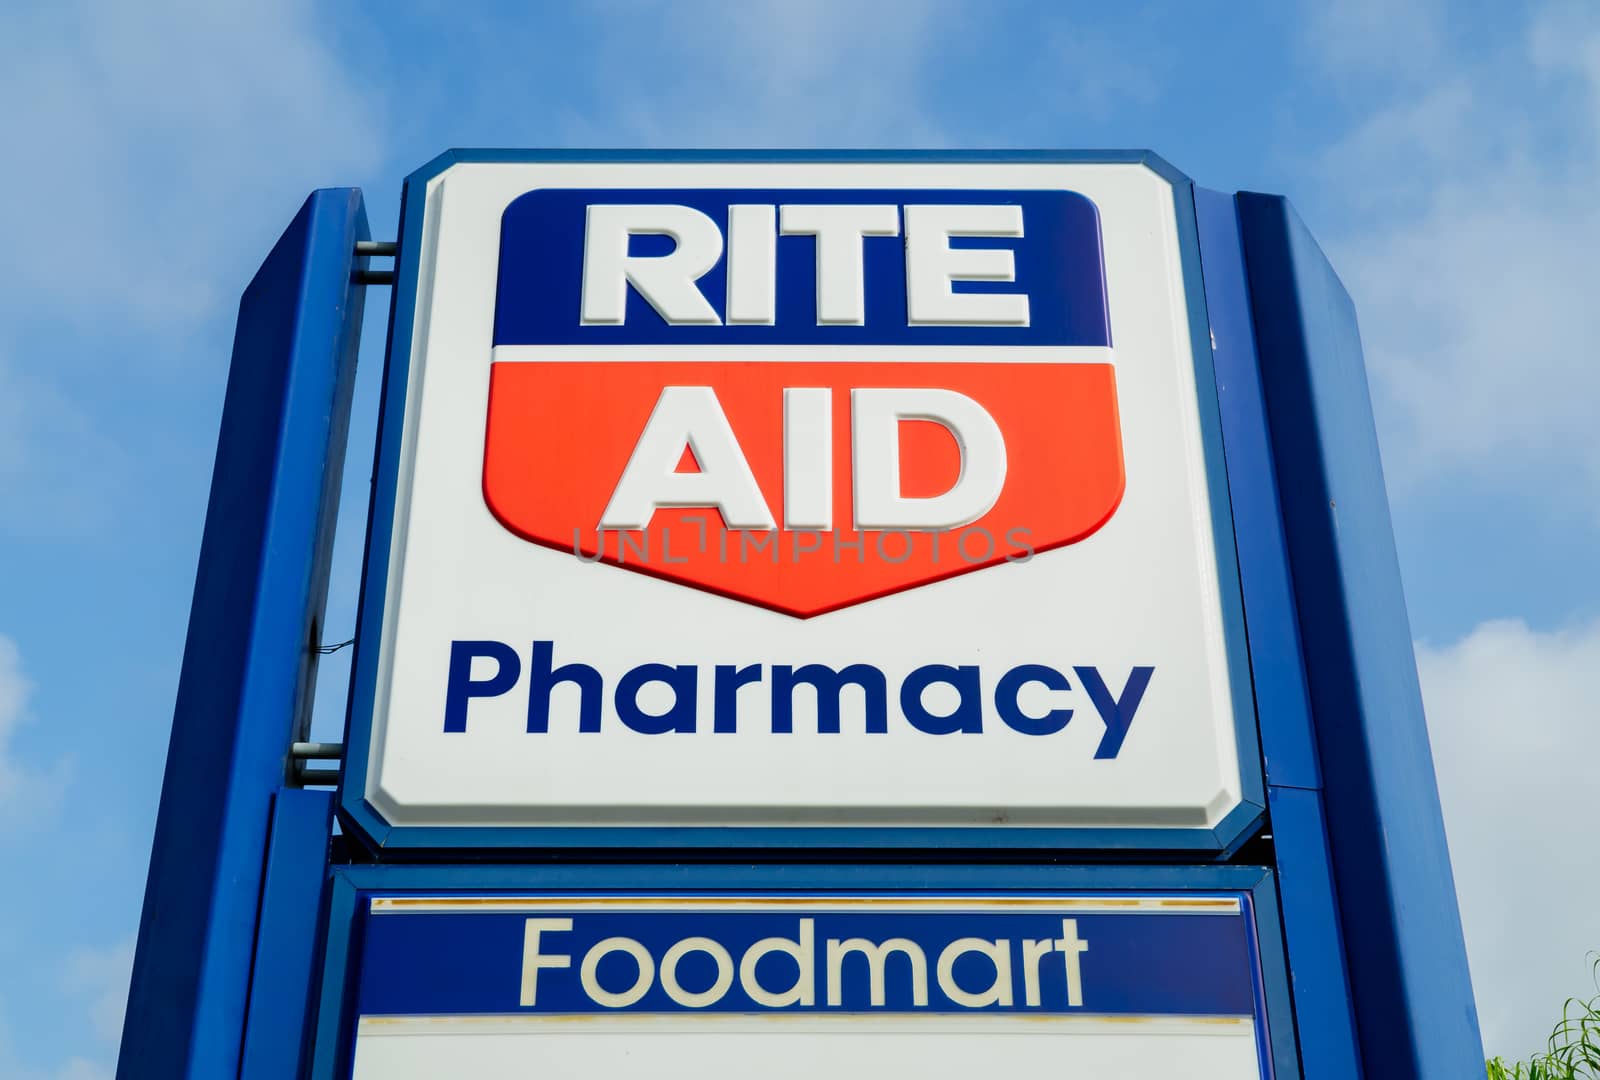 Rite Aid Pharmacy Store Exterior by wolterk